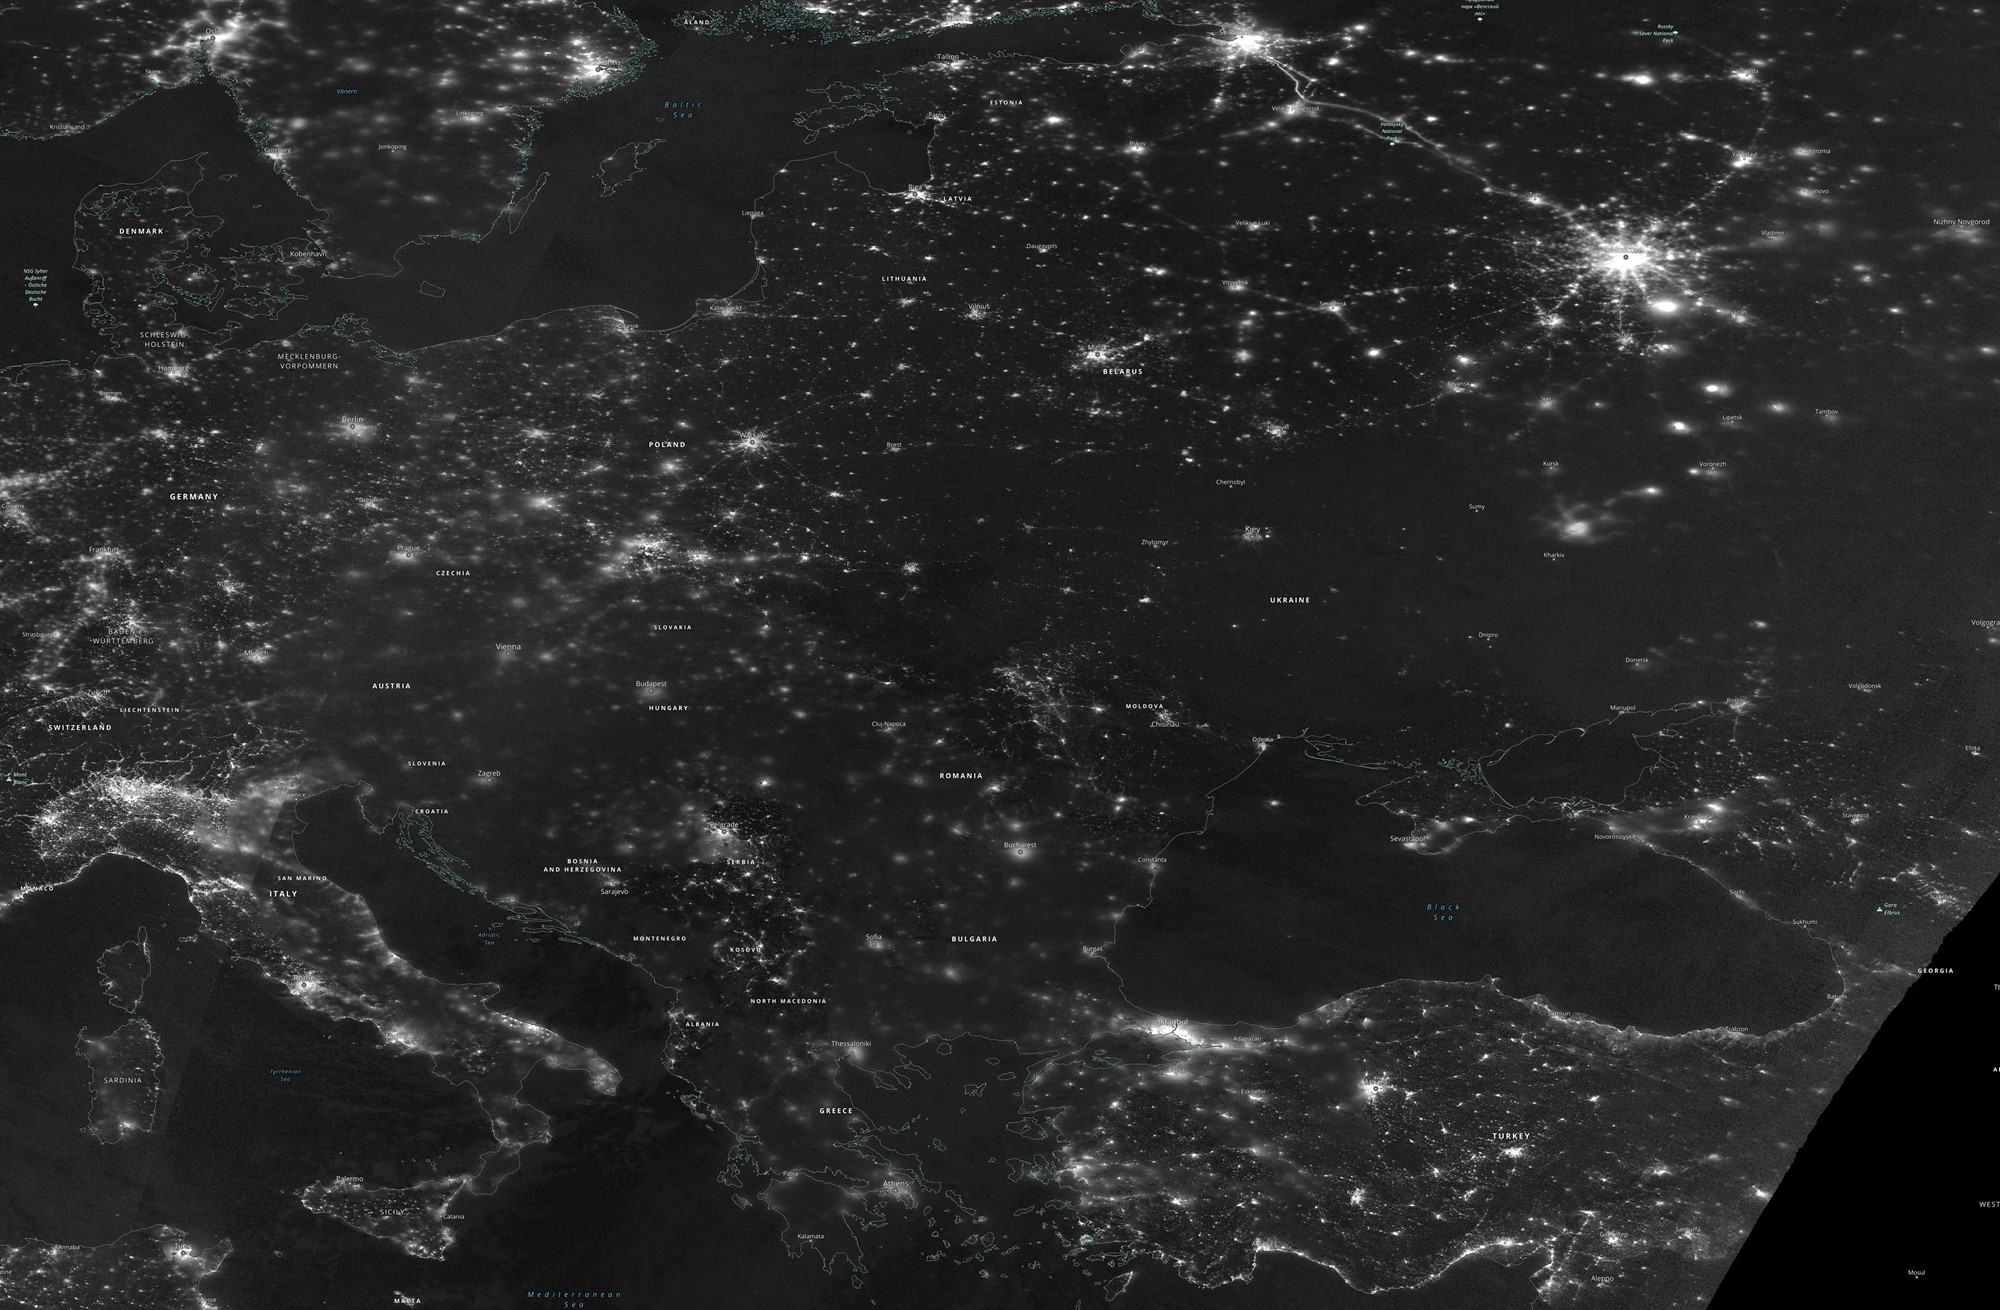 A greyscale satellite image indicating the night radiance of Europe from space on November 23, 2022,